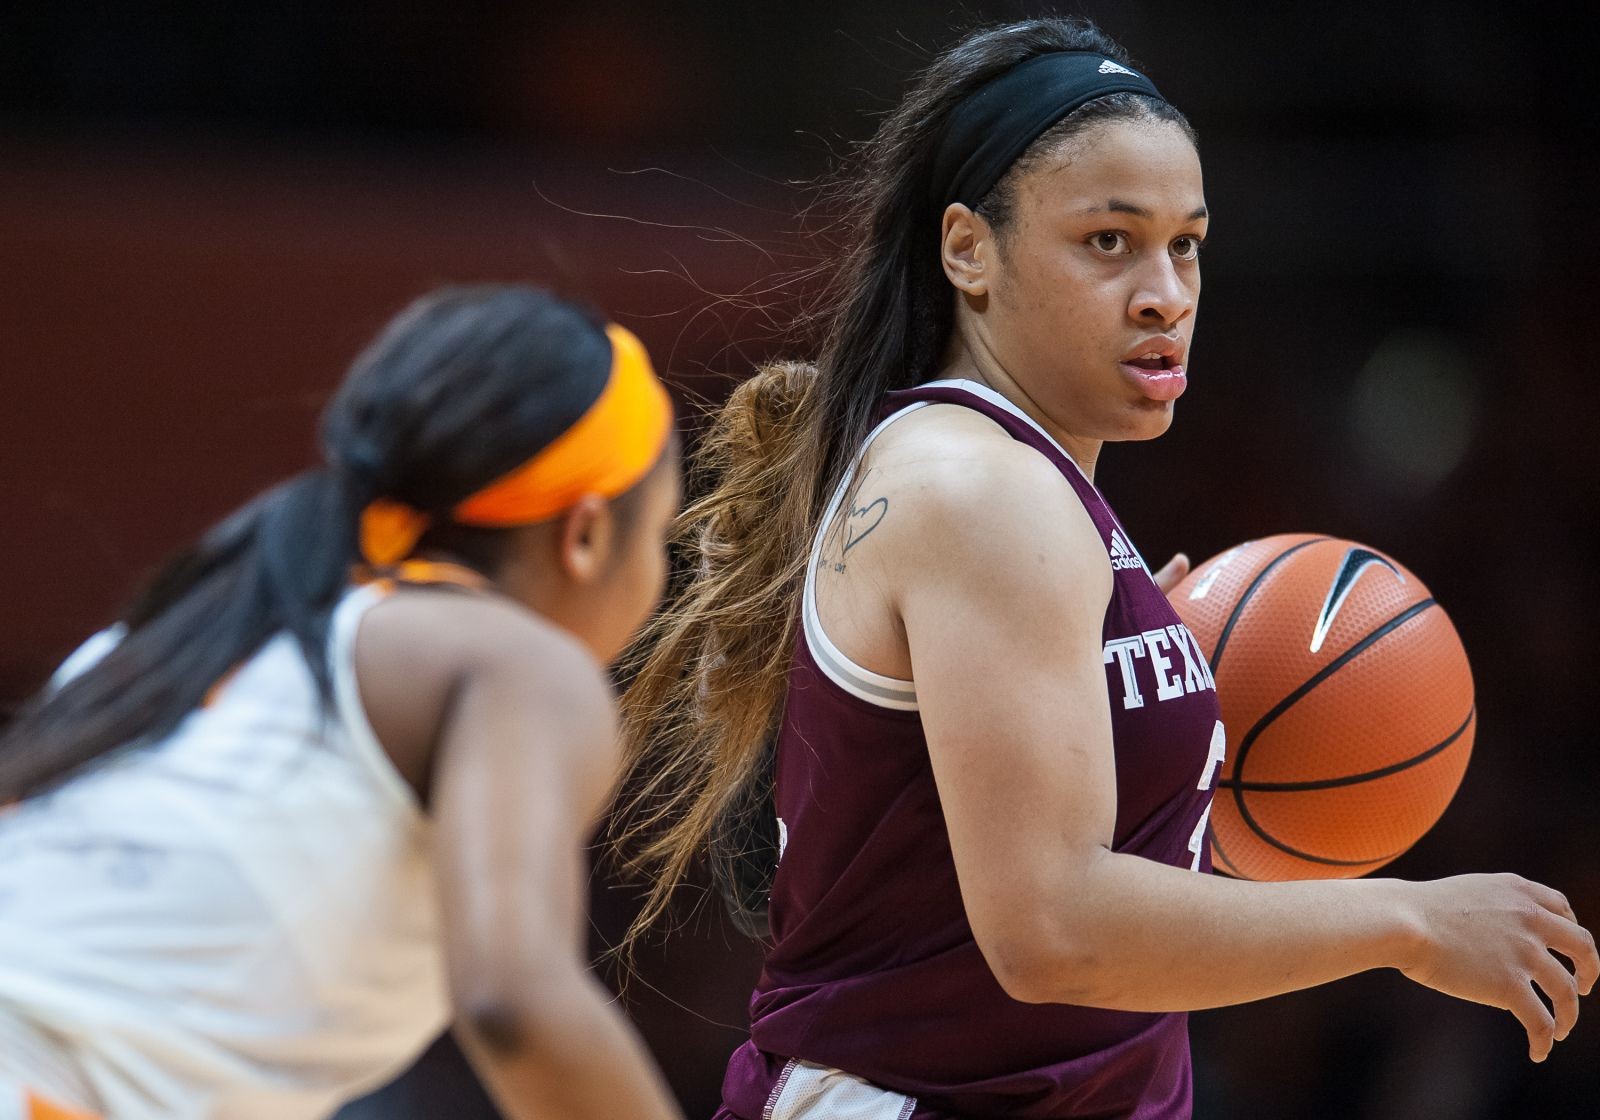 Texas A&M women’s basketball: Chennedy Carter dominant in run to Sweet 16